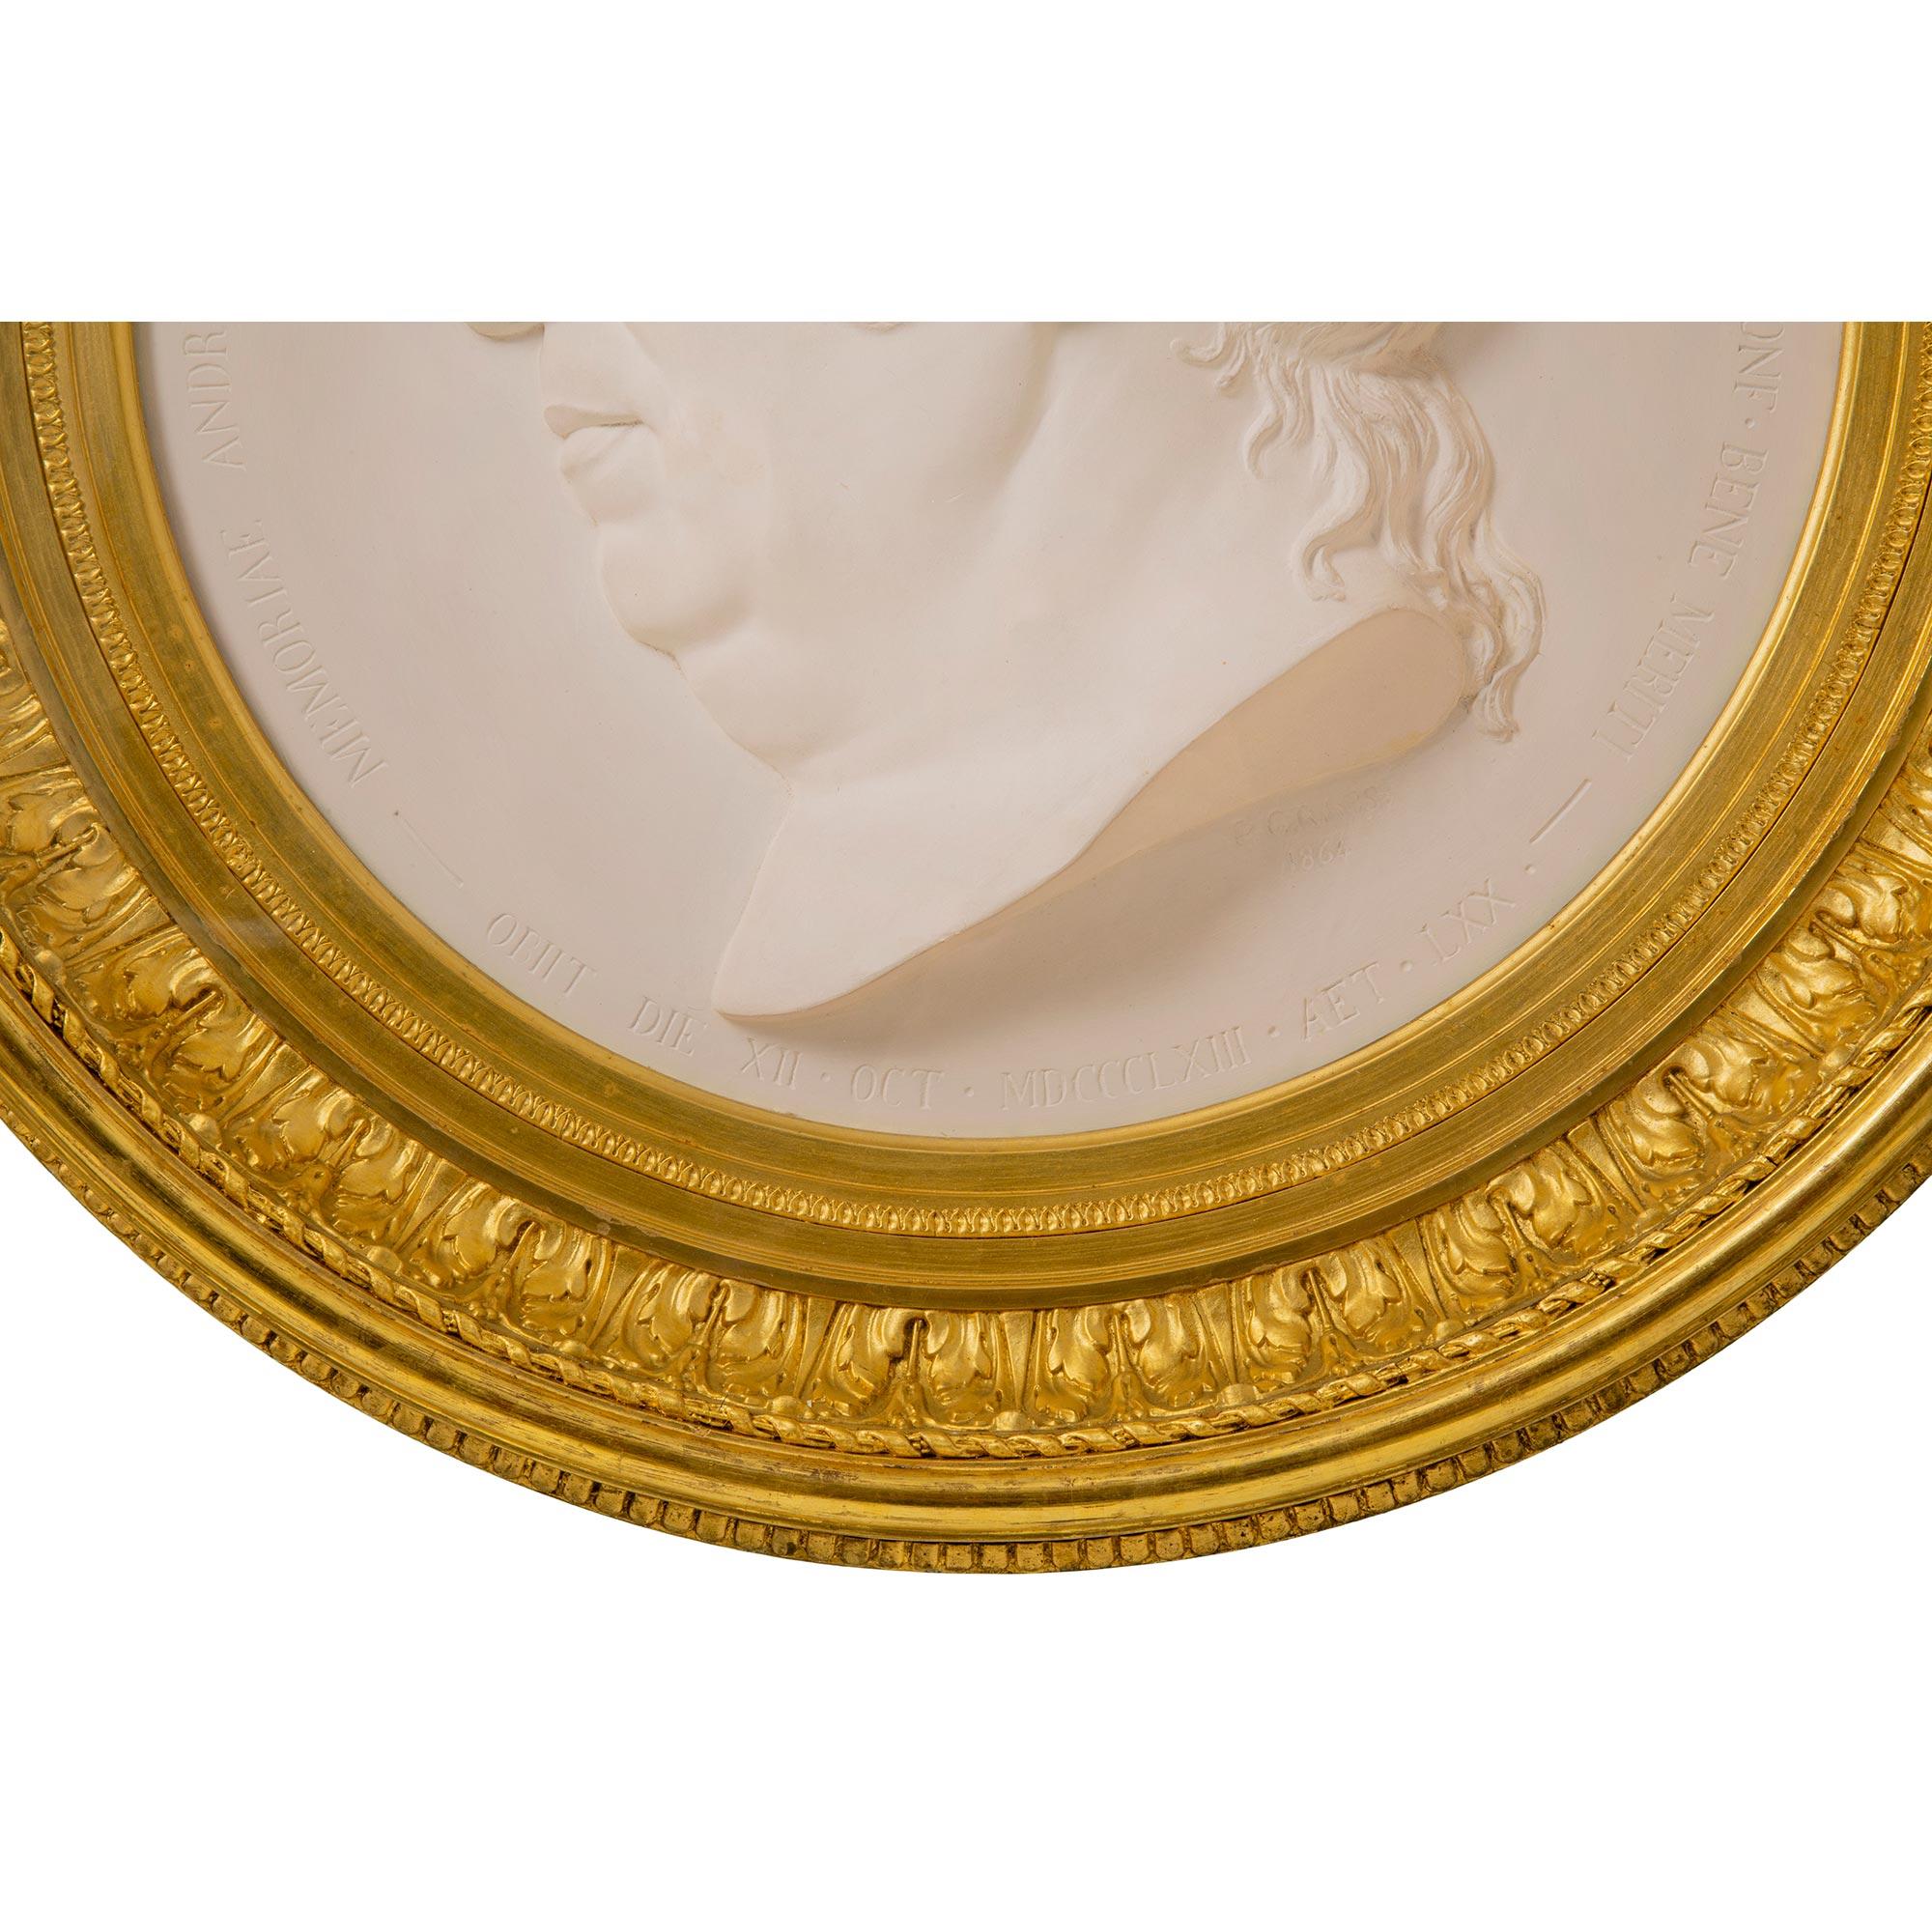 Italian 19th Century Louis XVI Style Giltwood and Plaster Wall Plaque For Sale 4